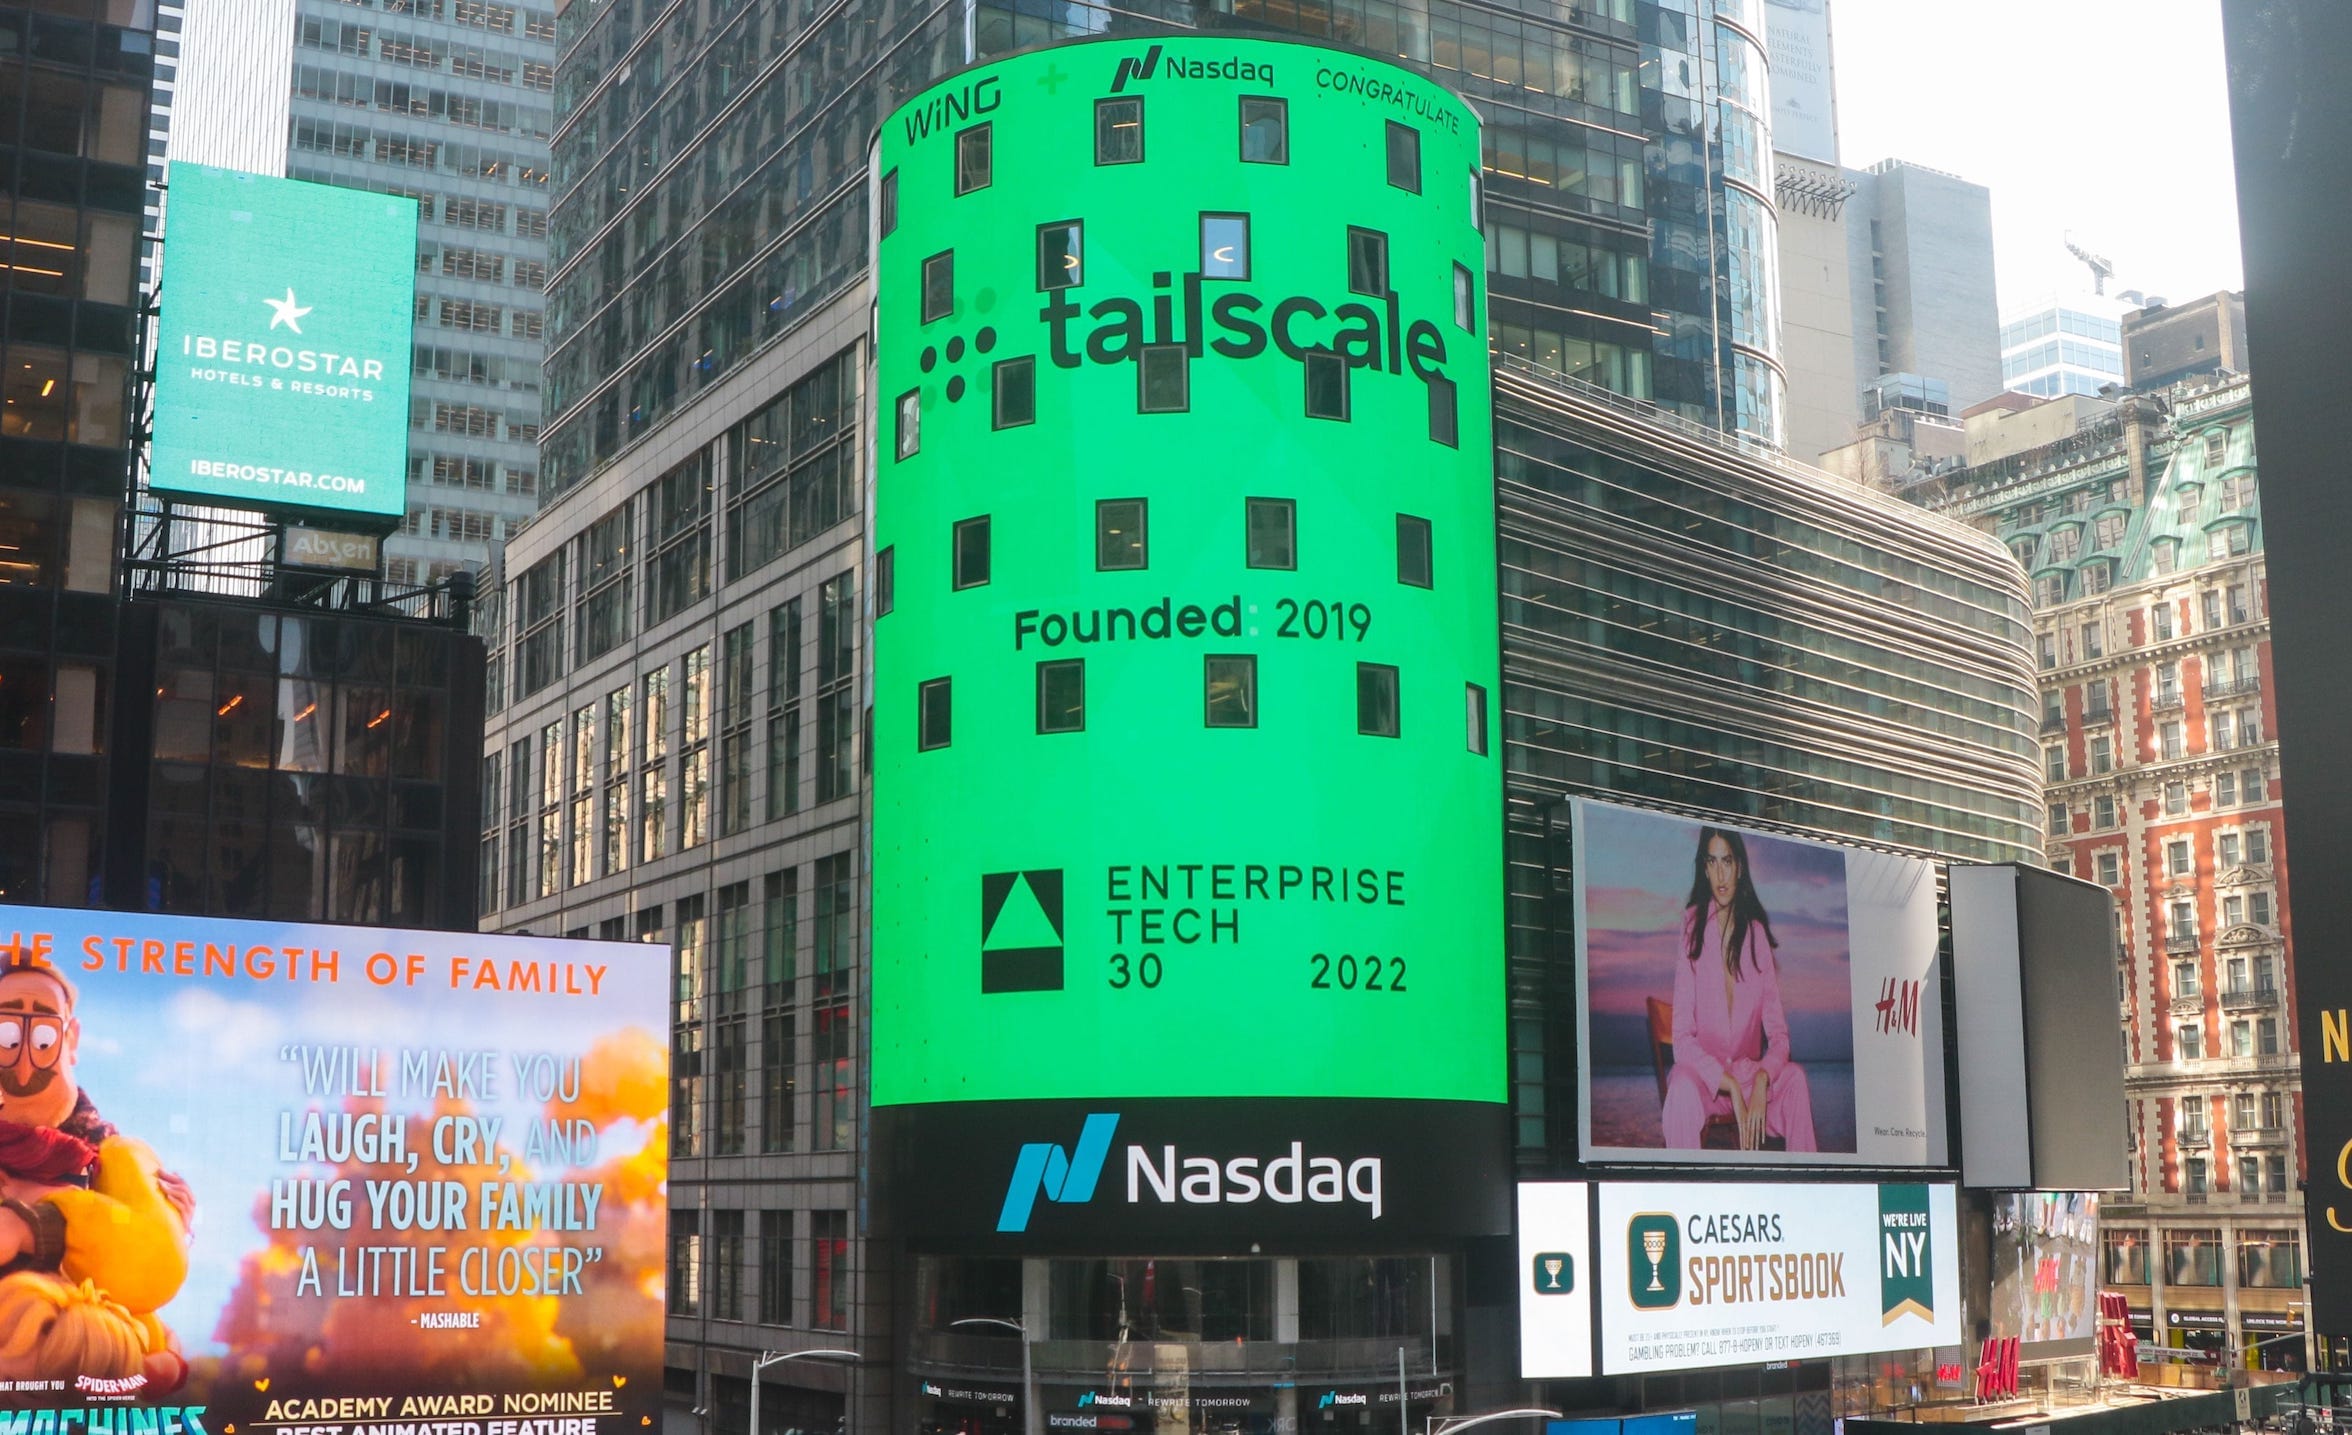 Tailscale highlighted on the New York NASDAQ